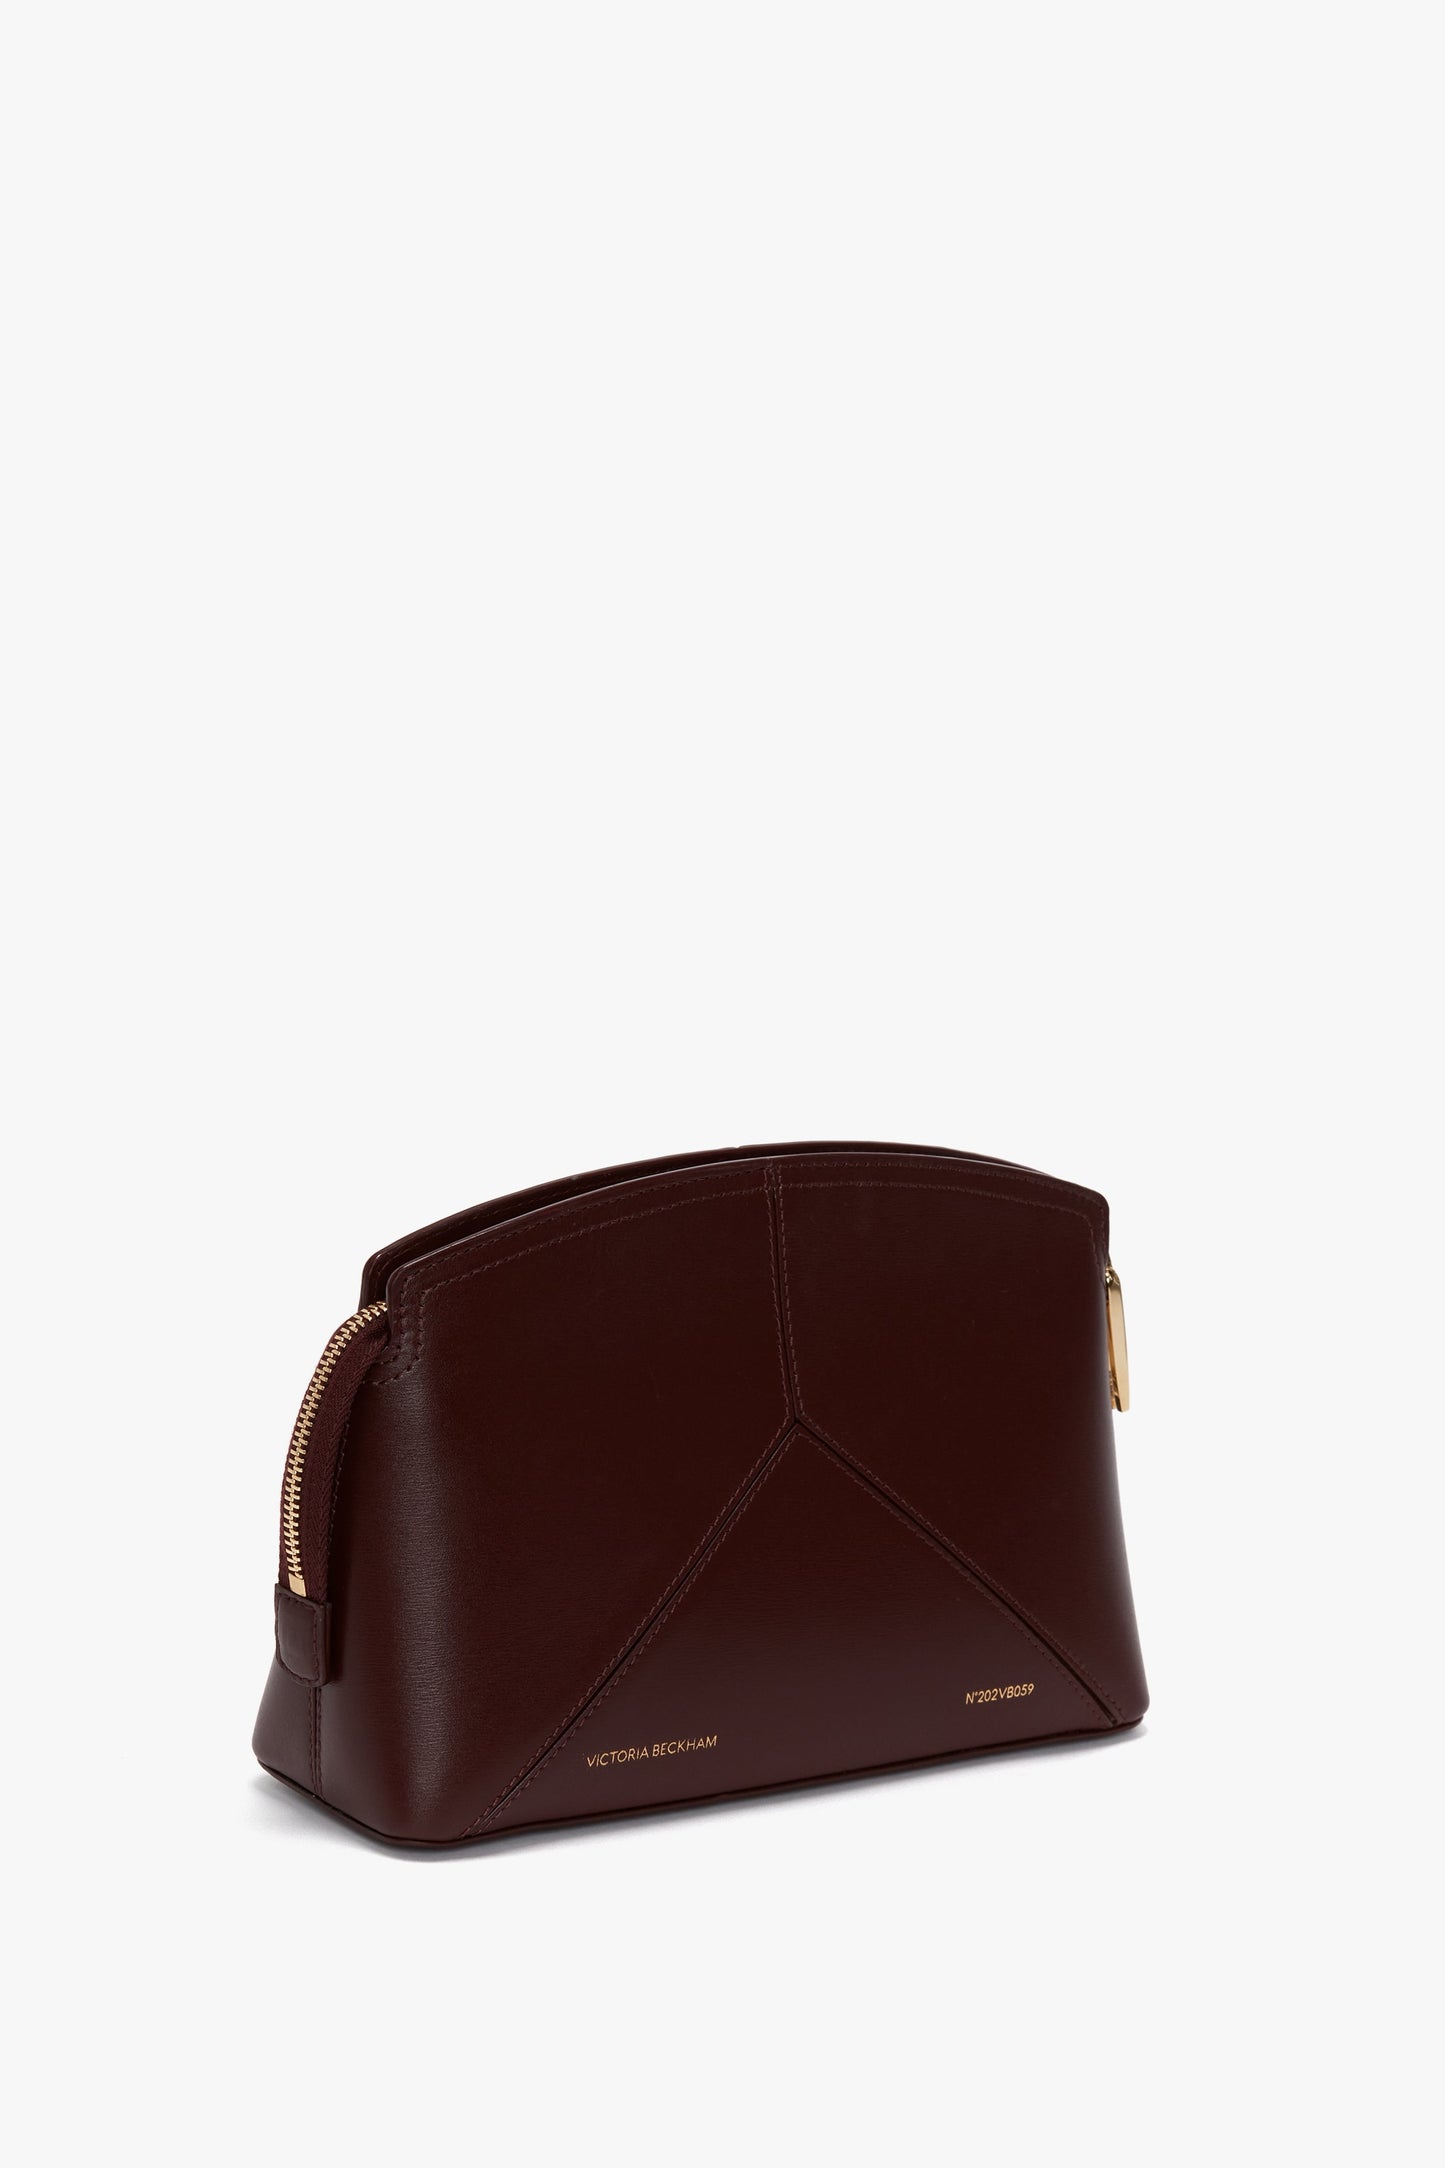 A Victoria Crossbody Bag In Burgundy Leather with gold zipper accents, displaying the brand names "Victoria Beckham" in gold lettering on the front side. The design is complemented by a secure padlock closure for added elegance.